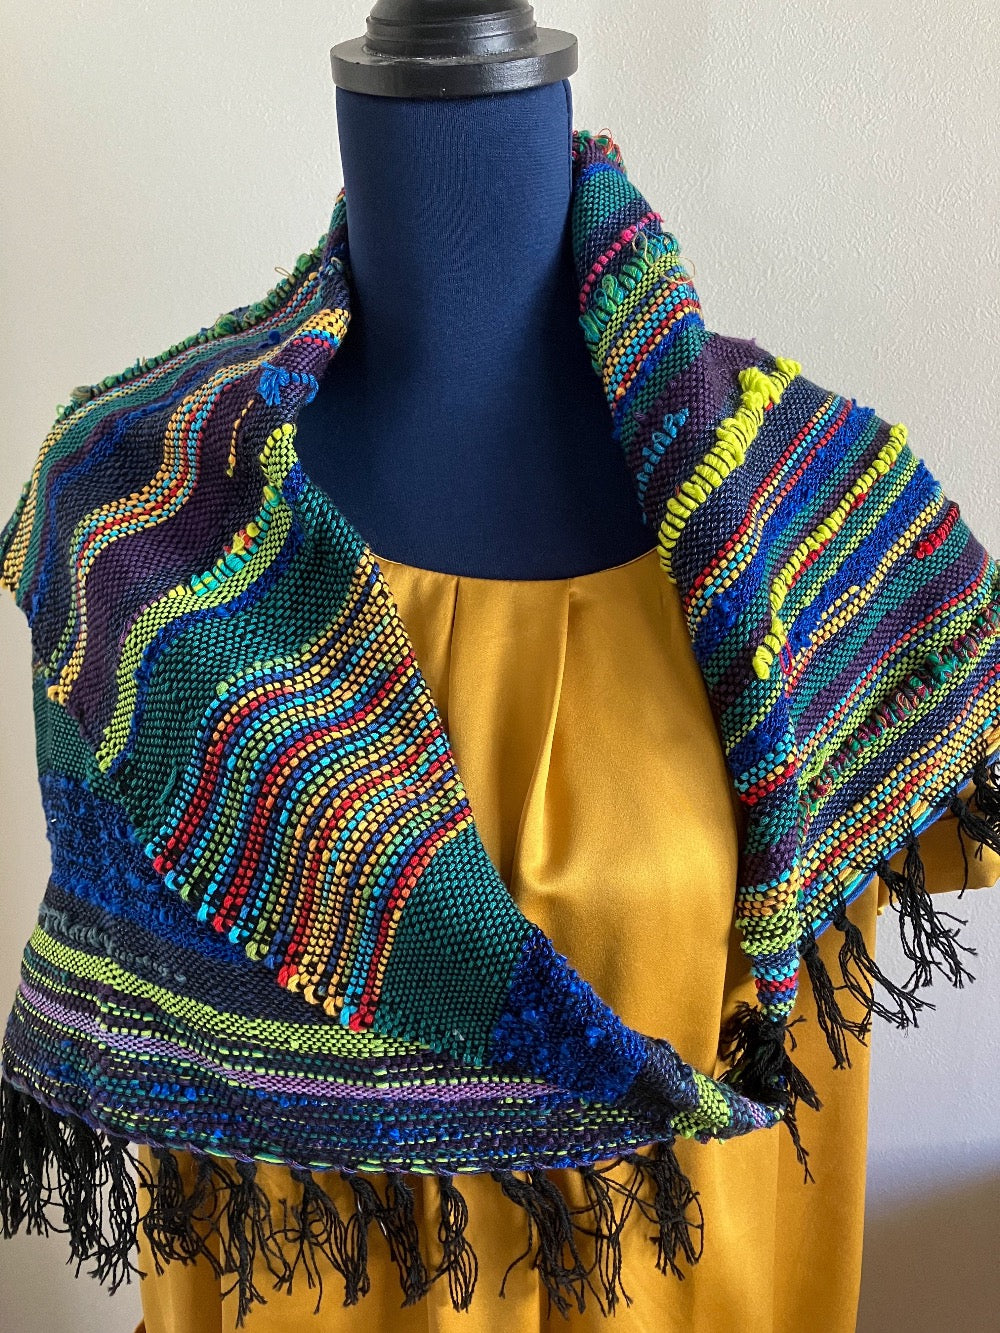 Multi colored shawl scarf on mannequin dressed in gold